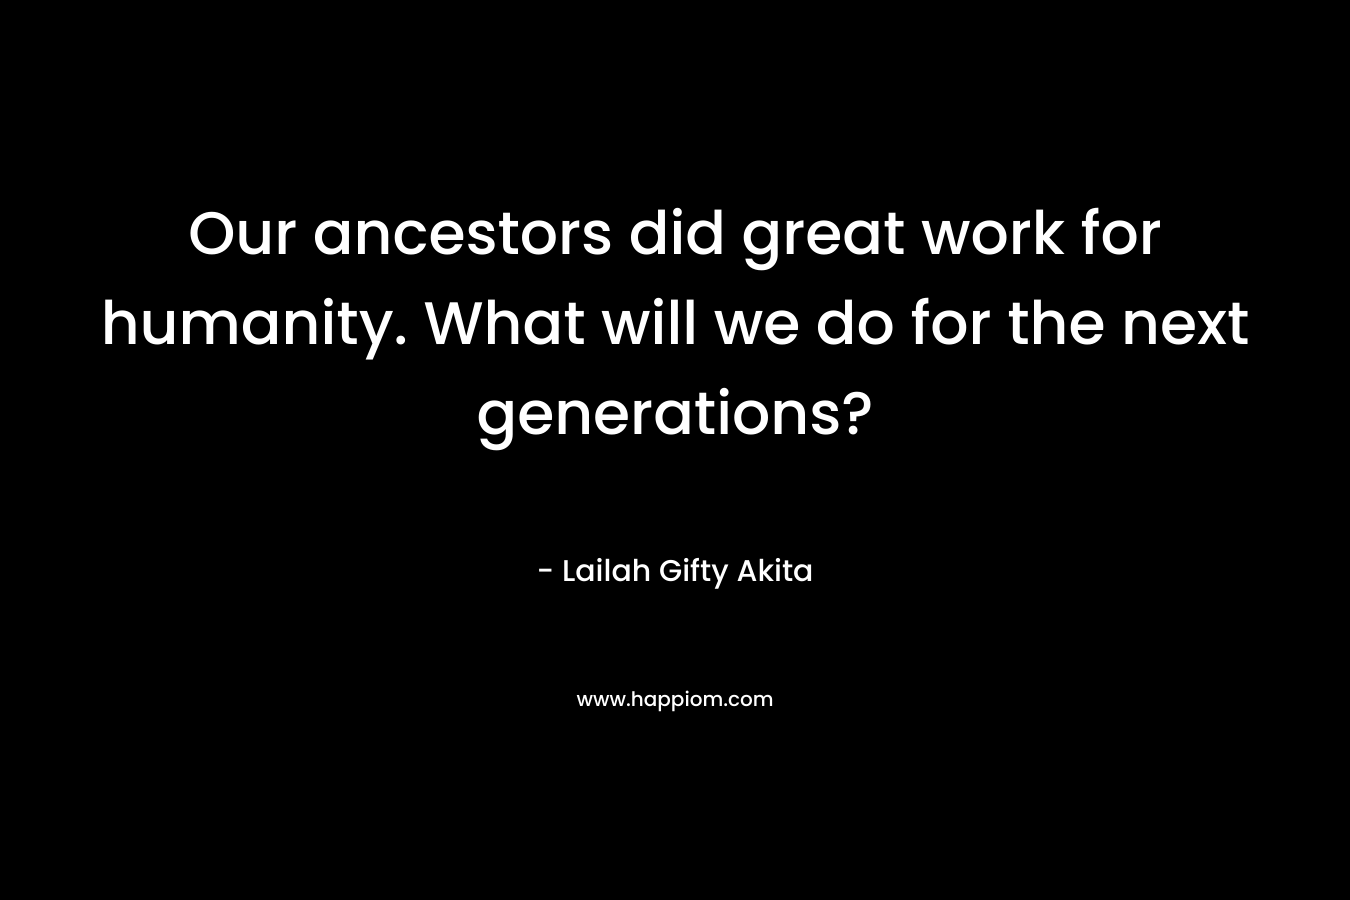 Our ancestors did great work for humanity. What will we do for the next generations?